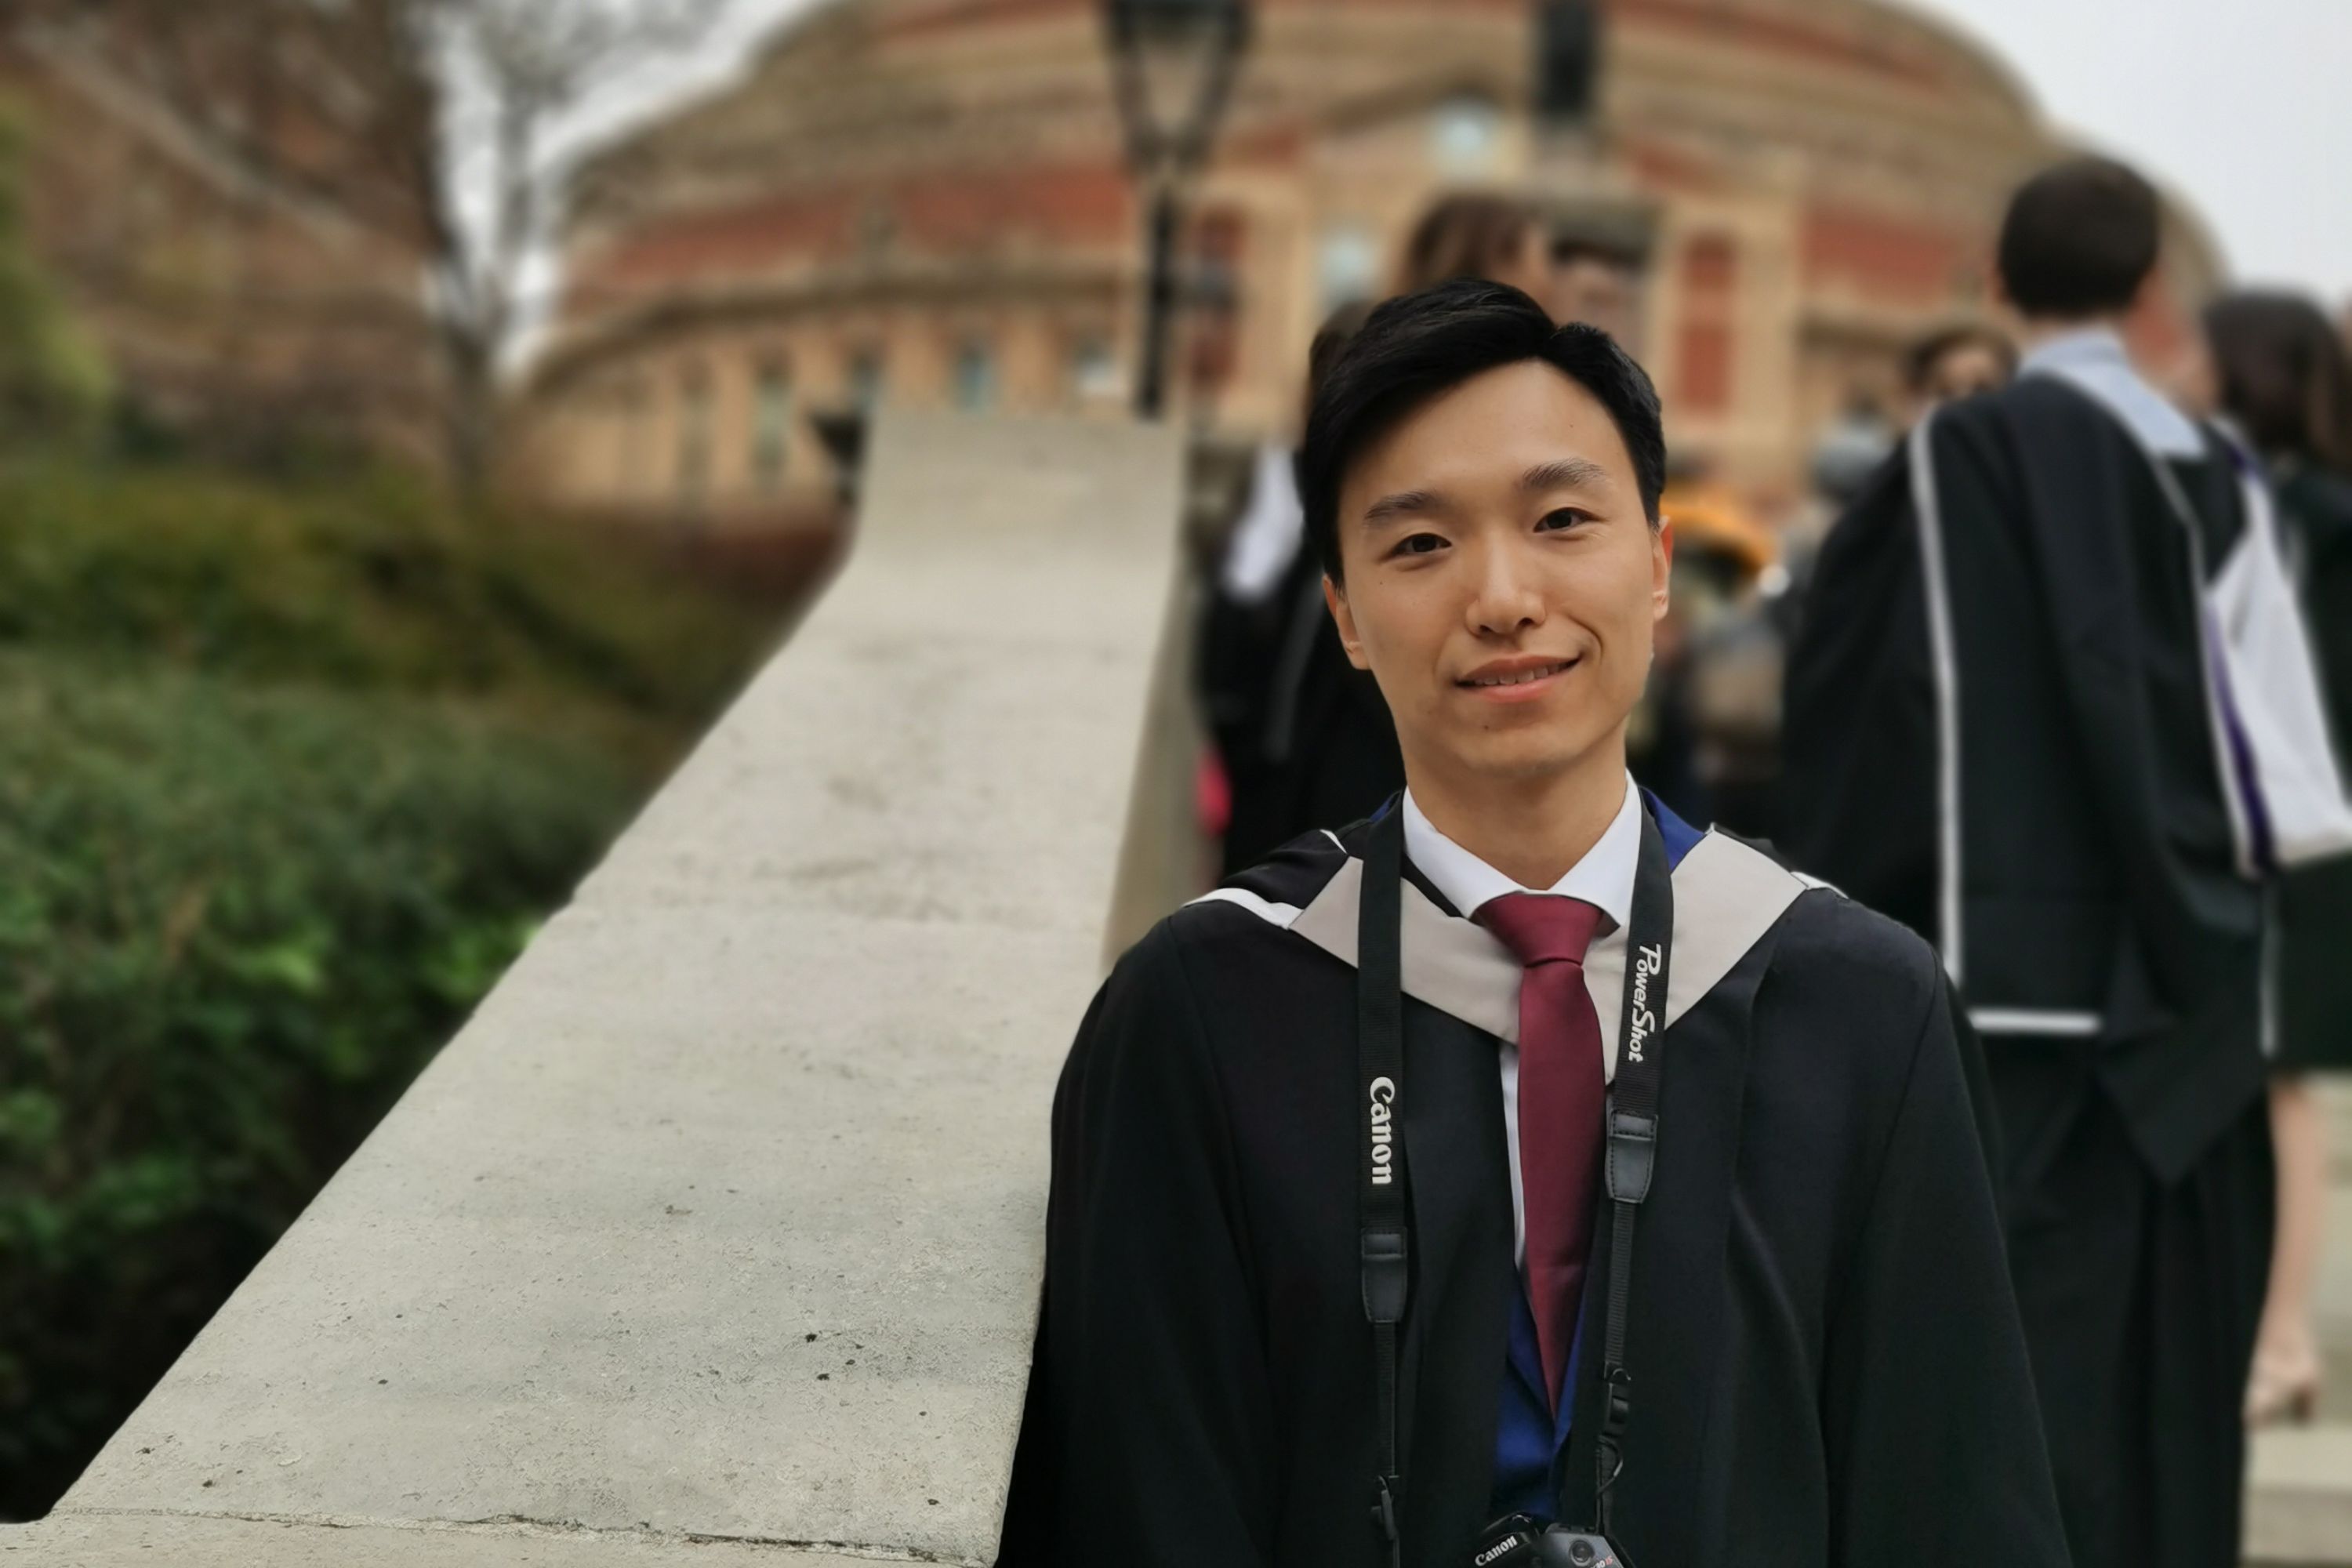 Griffin Gui in graduation gown outside Royal Albert Hall